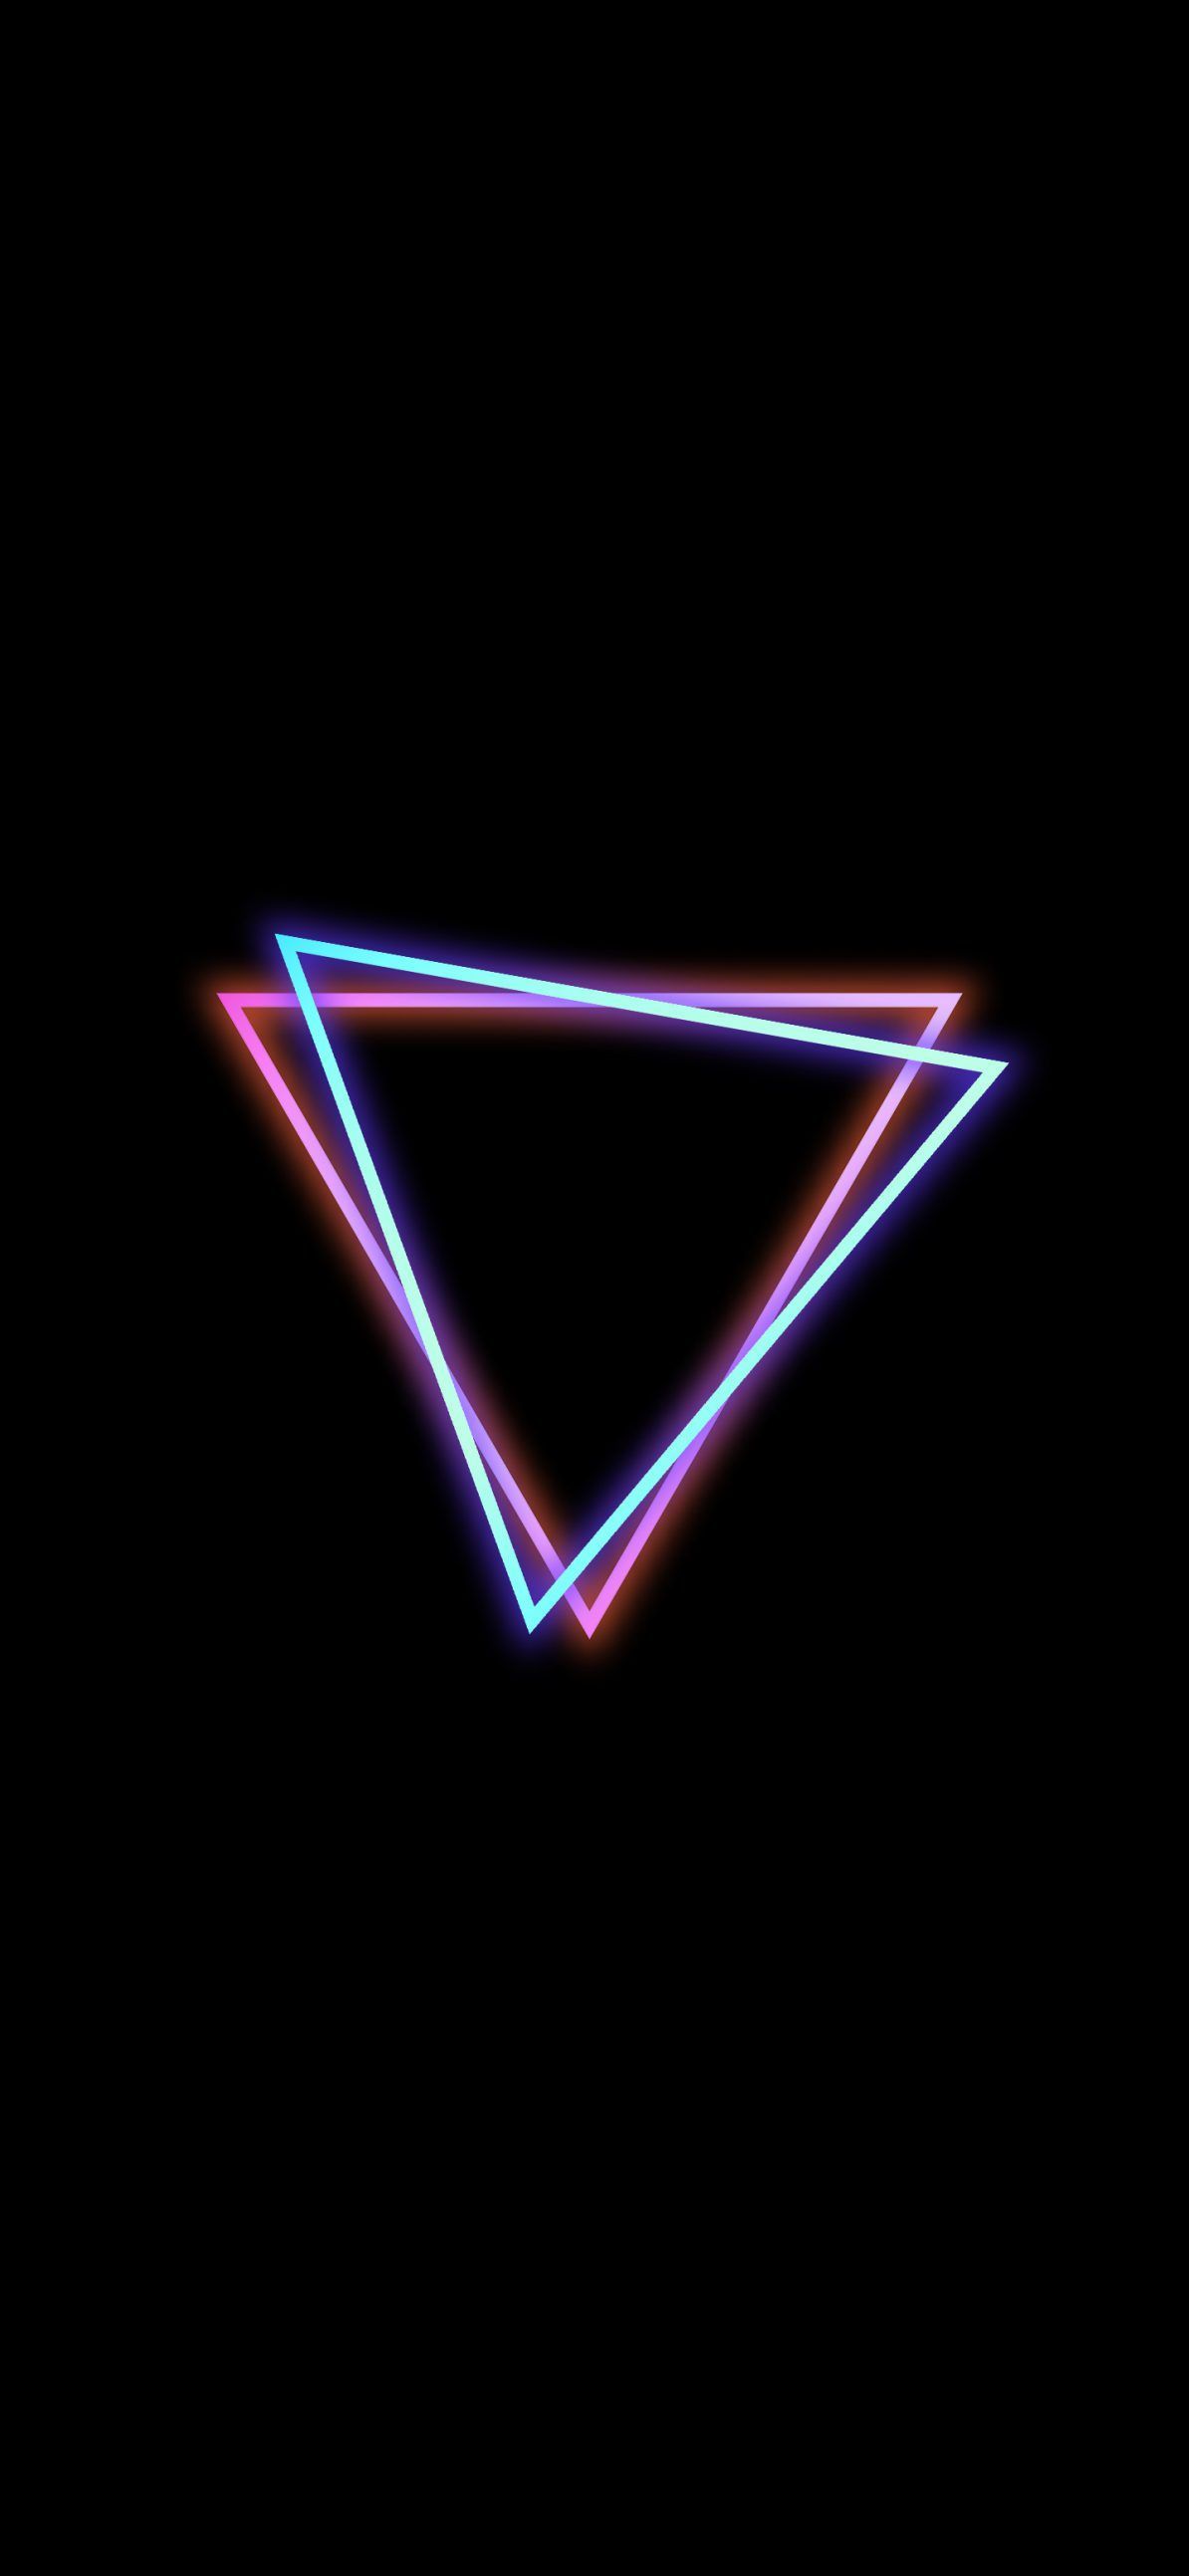 Dual Triangles Amoled Wallpaper.in. Neon wallpaper, Smartphone wallpaper, Wallpaper